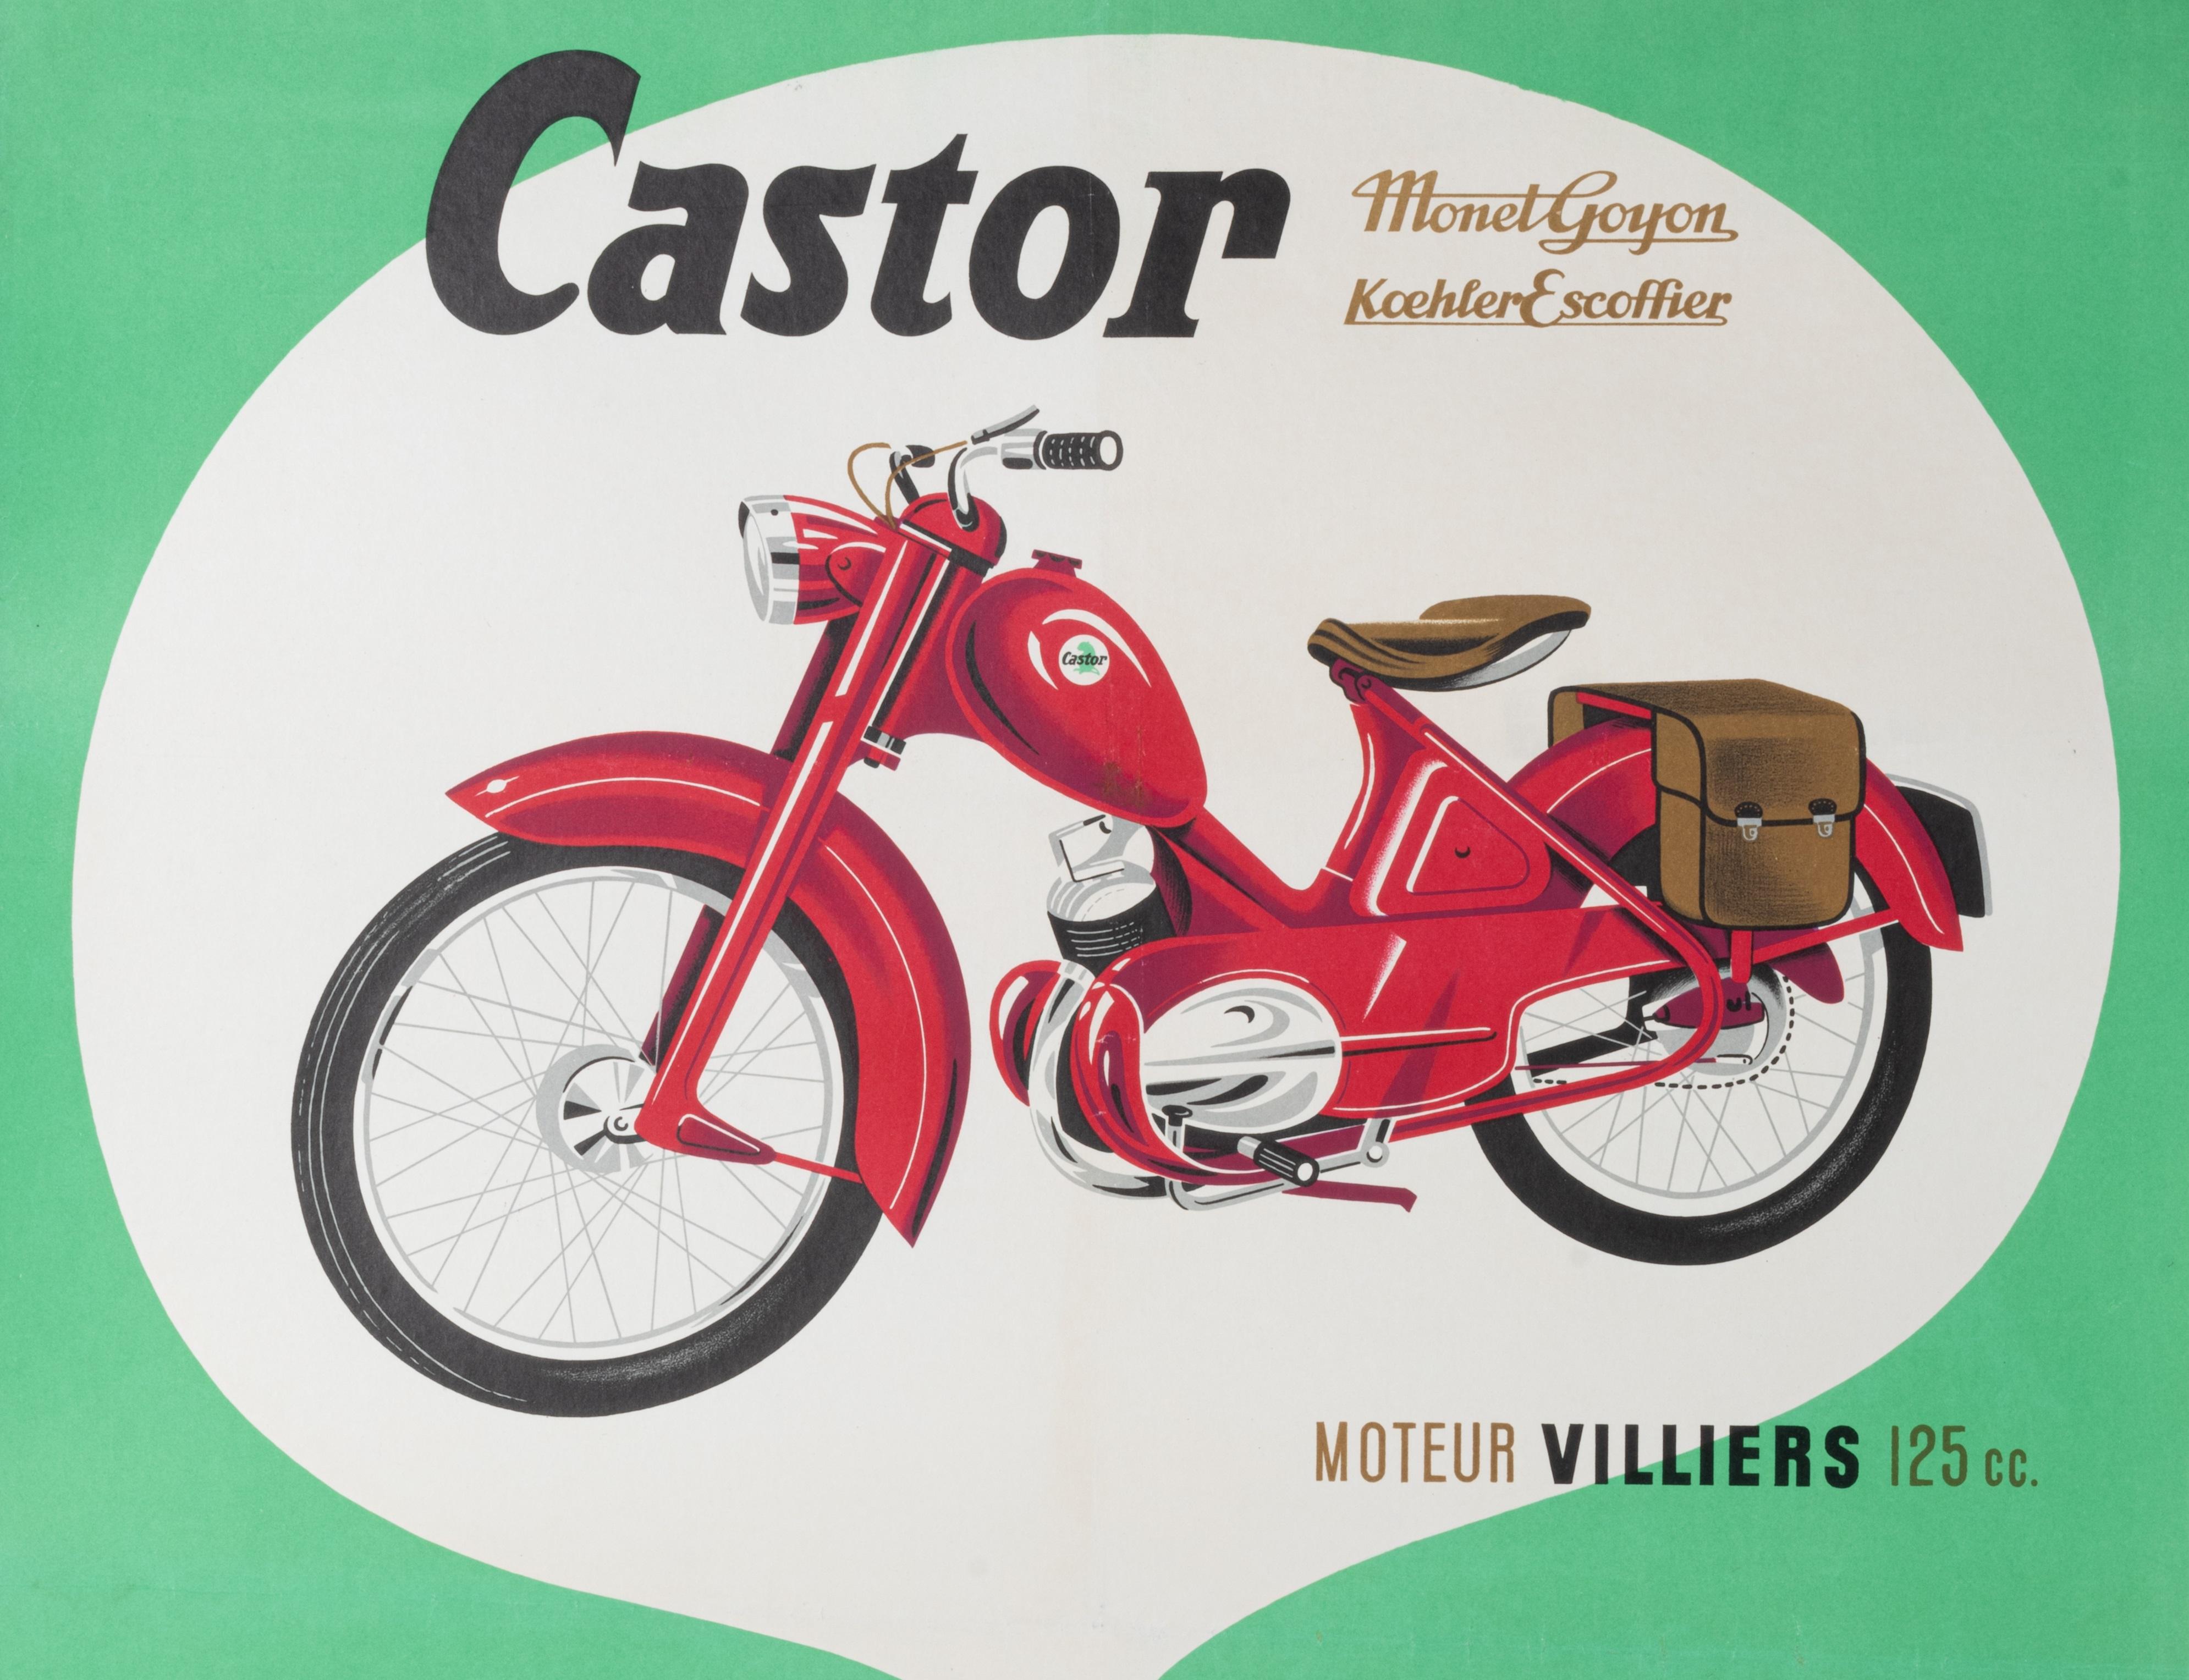 Advertising poster created by Gouju and Almaric for the Castor motorcycle, created in 1956 by the manufacturer Monet & Goyon / Koehler Escoffier.

Artist: Gouju et Amalric
Title: Moto Castor - Monet & Goyon / Koehler Escoffier 
Date: 1956
Size (w x